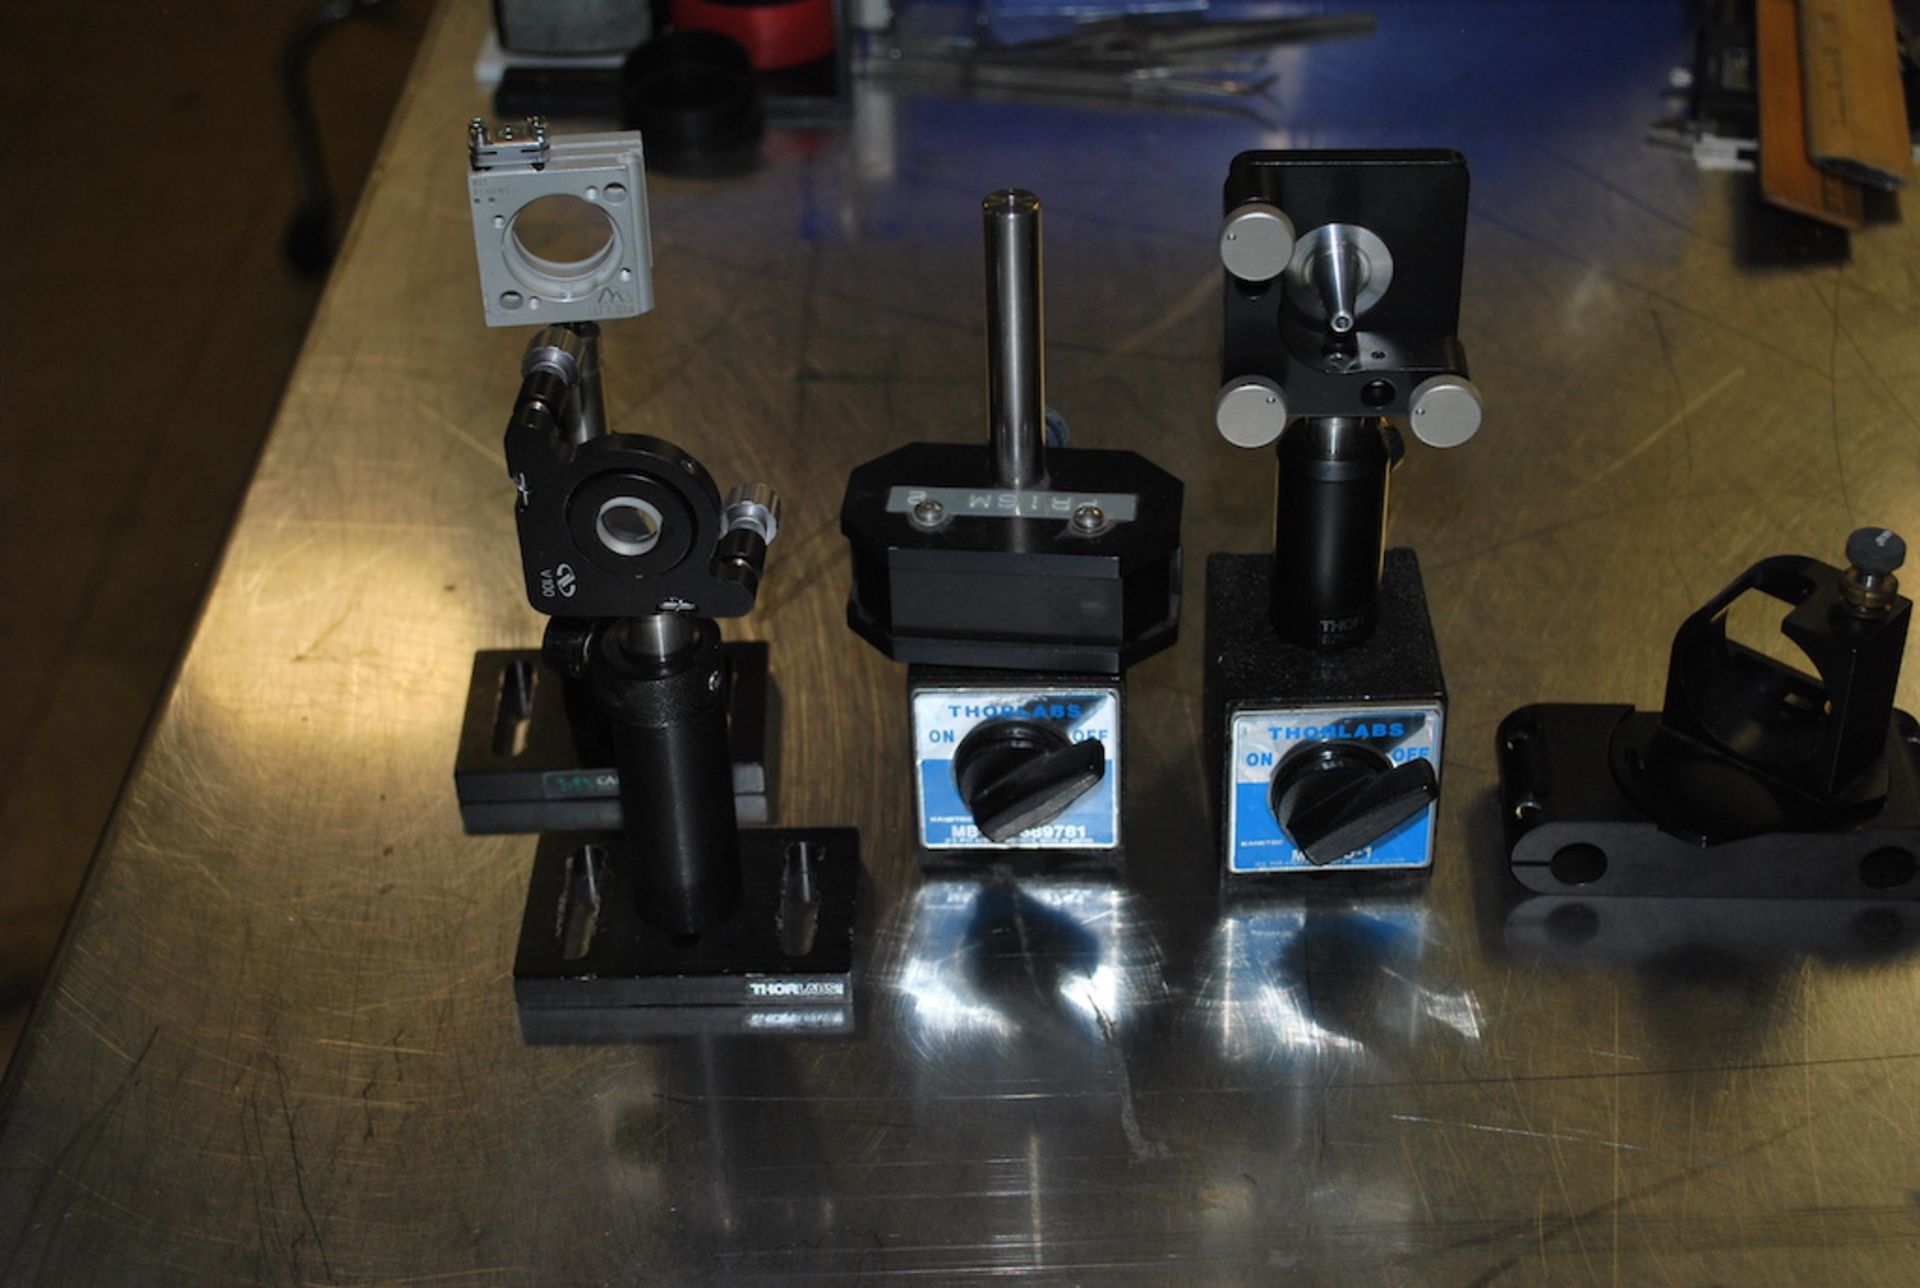 Qty-3 1" XY optical mounts on stands + Dispersion prism ( 25 % - 75% ratio ) - Image 2 of 14